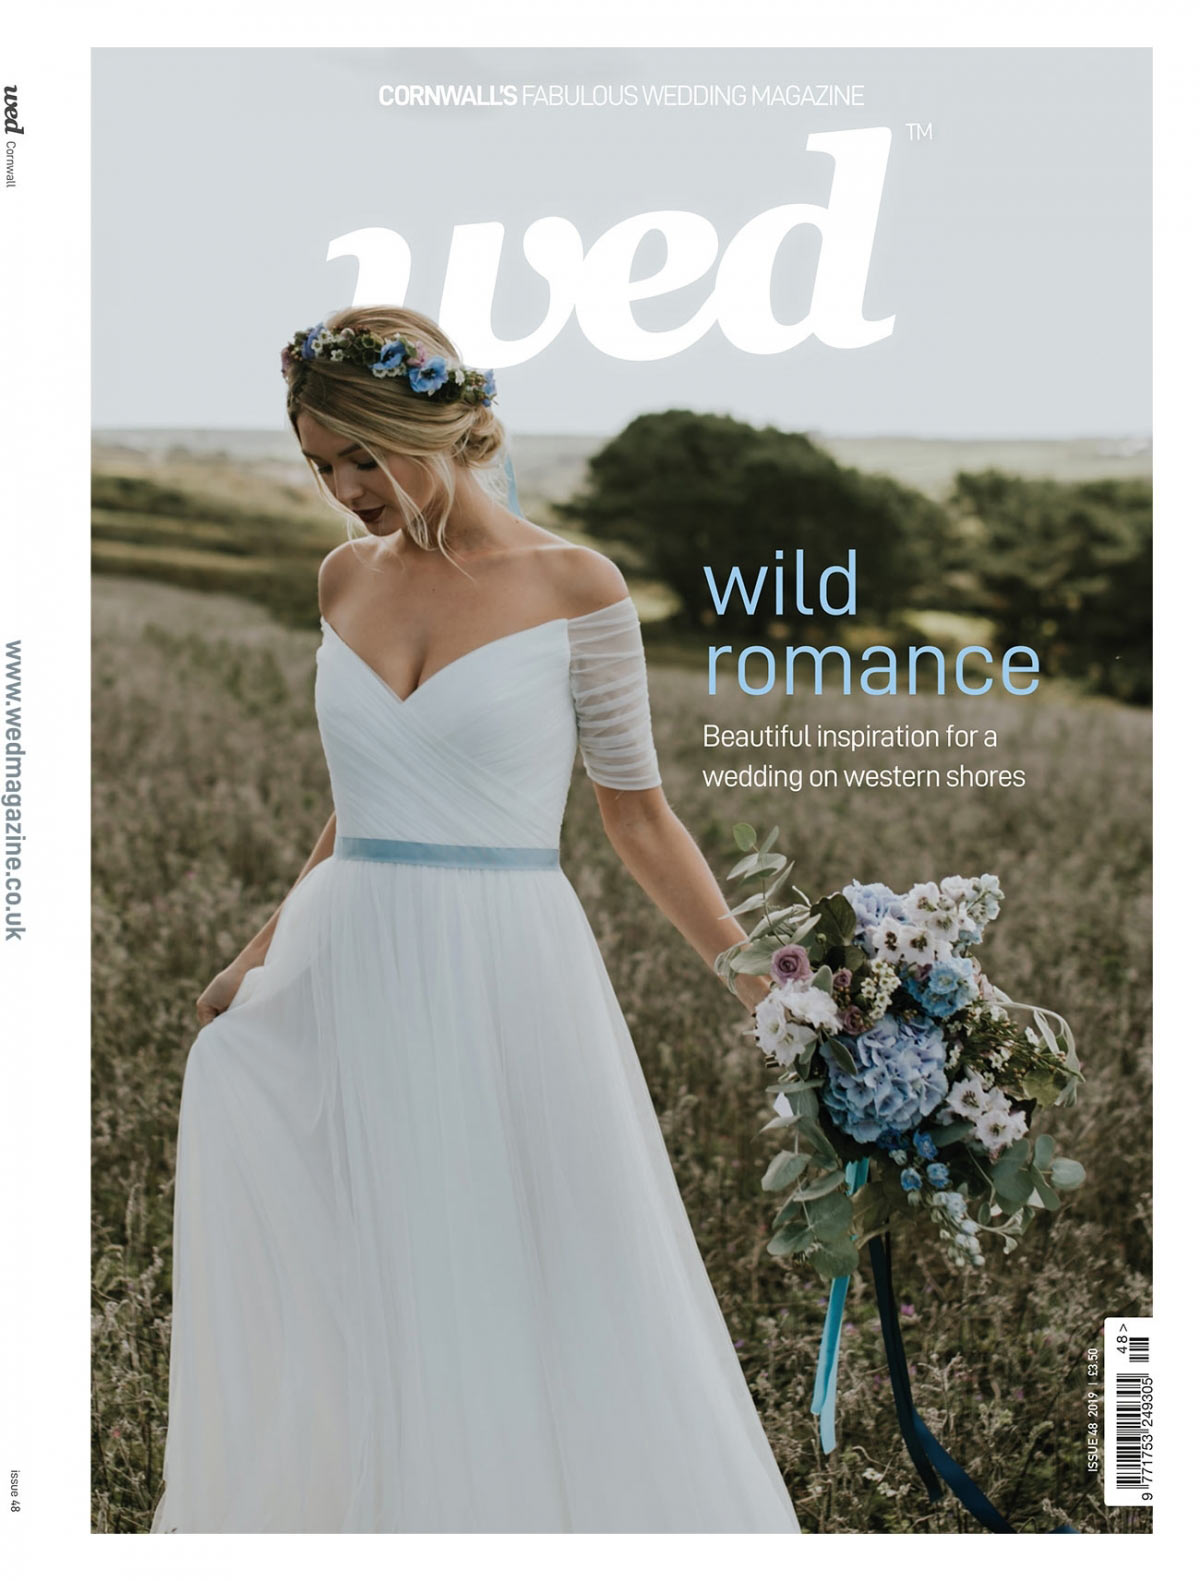 Subscribe to Wed Magazine!